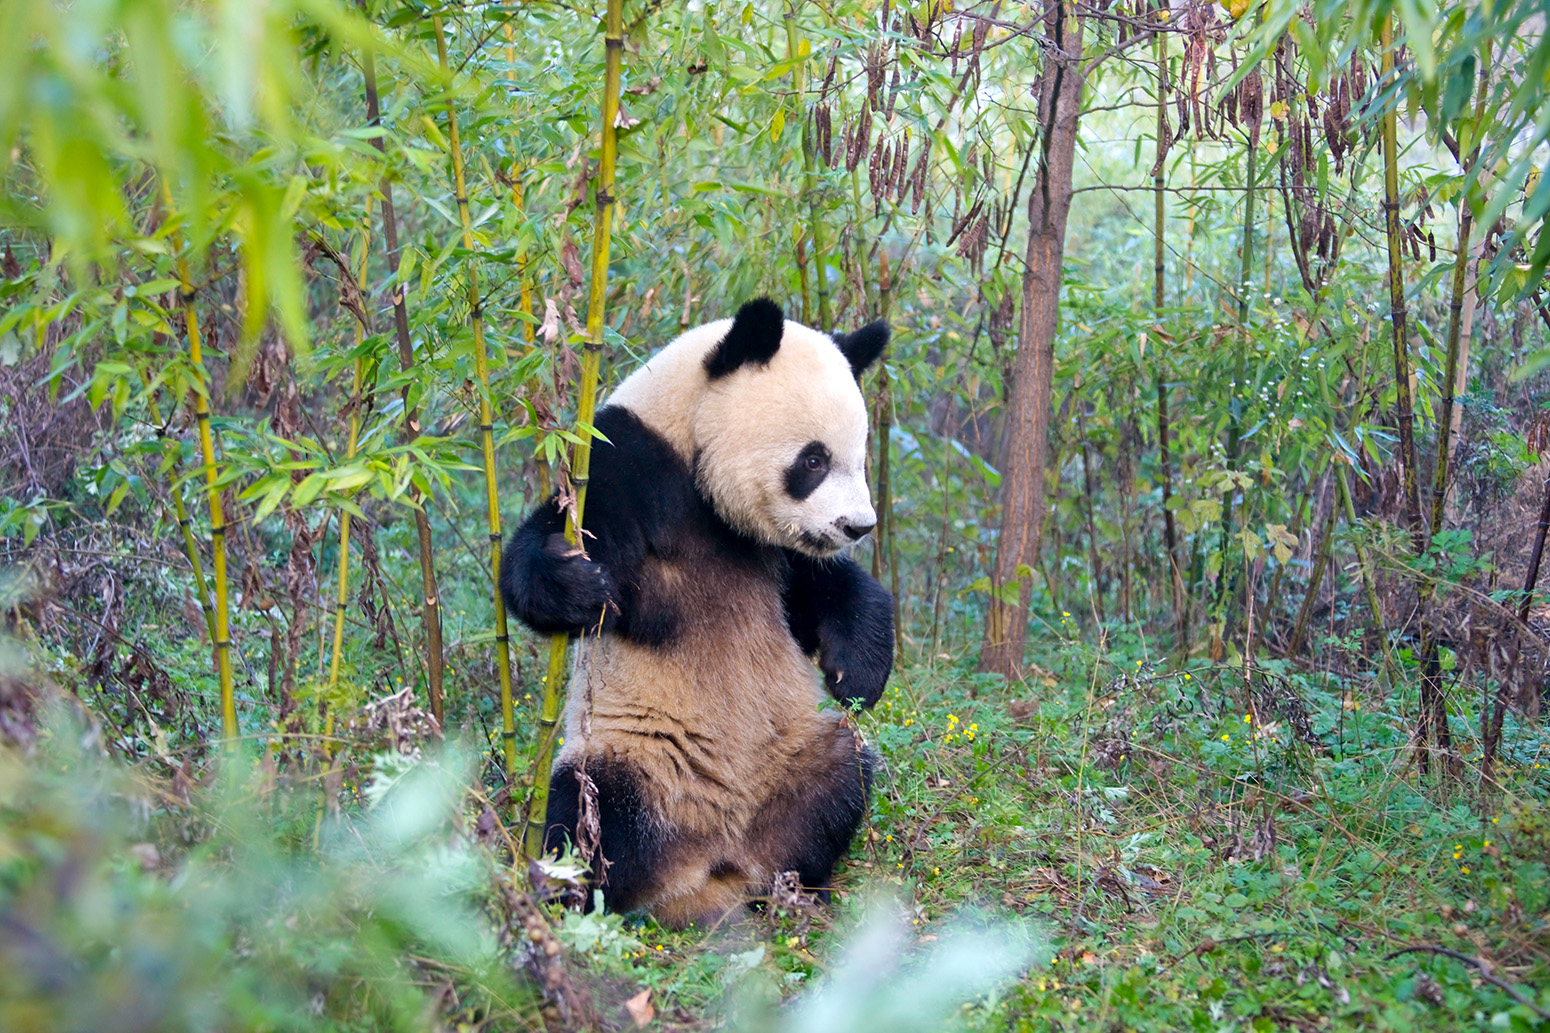 What are threats to giant pandas?